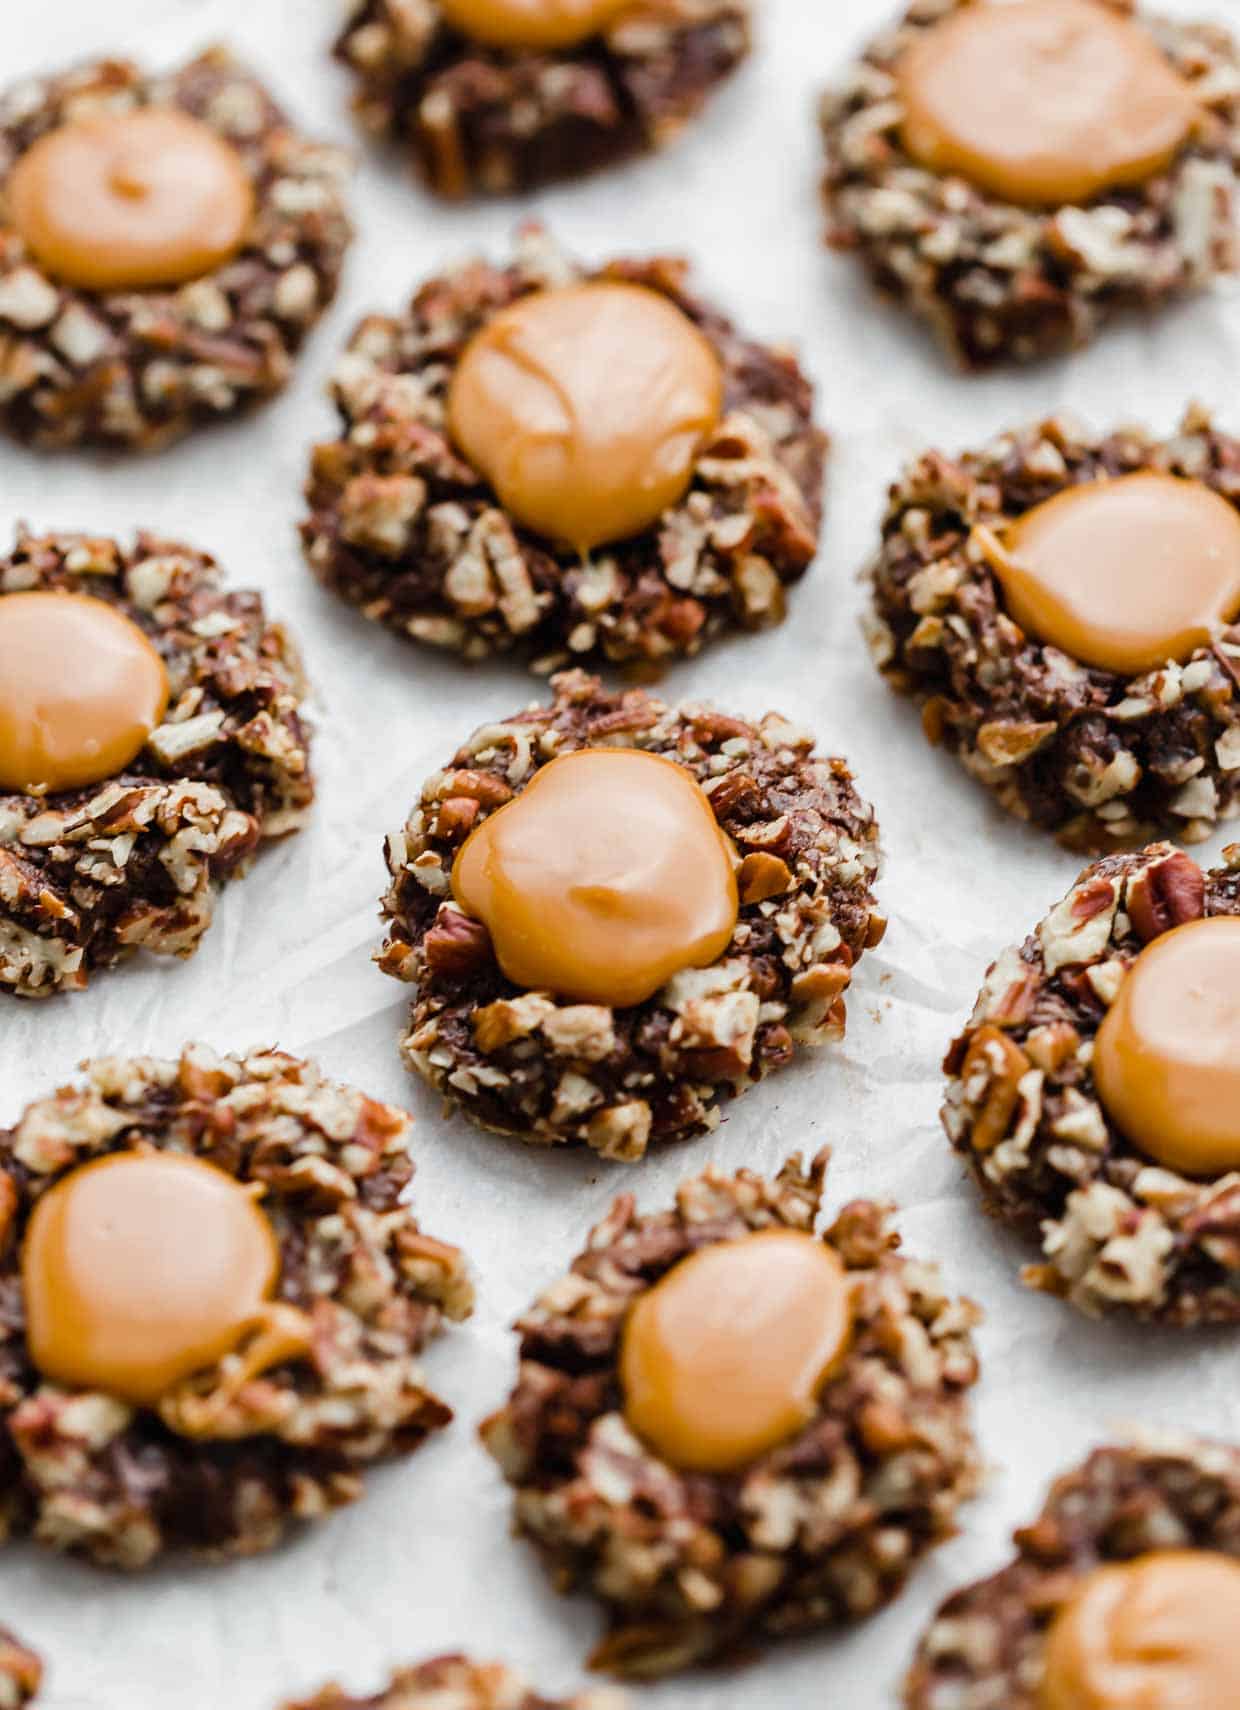 Melted caramel in the center of chocolate pecan covered cookies. 